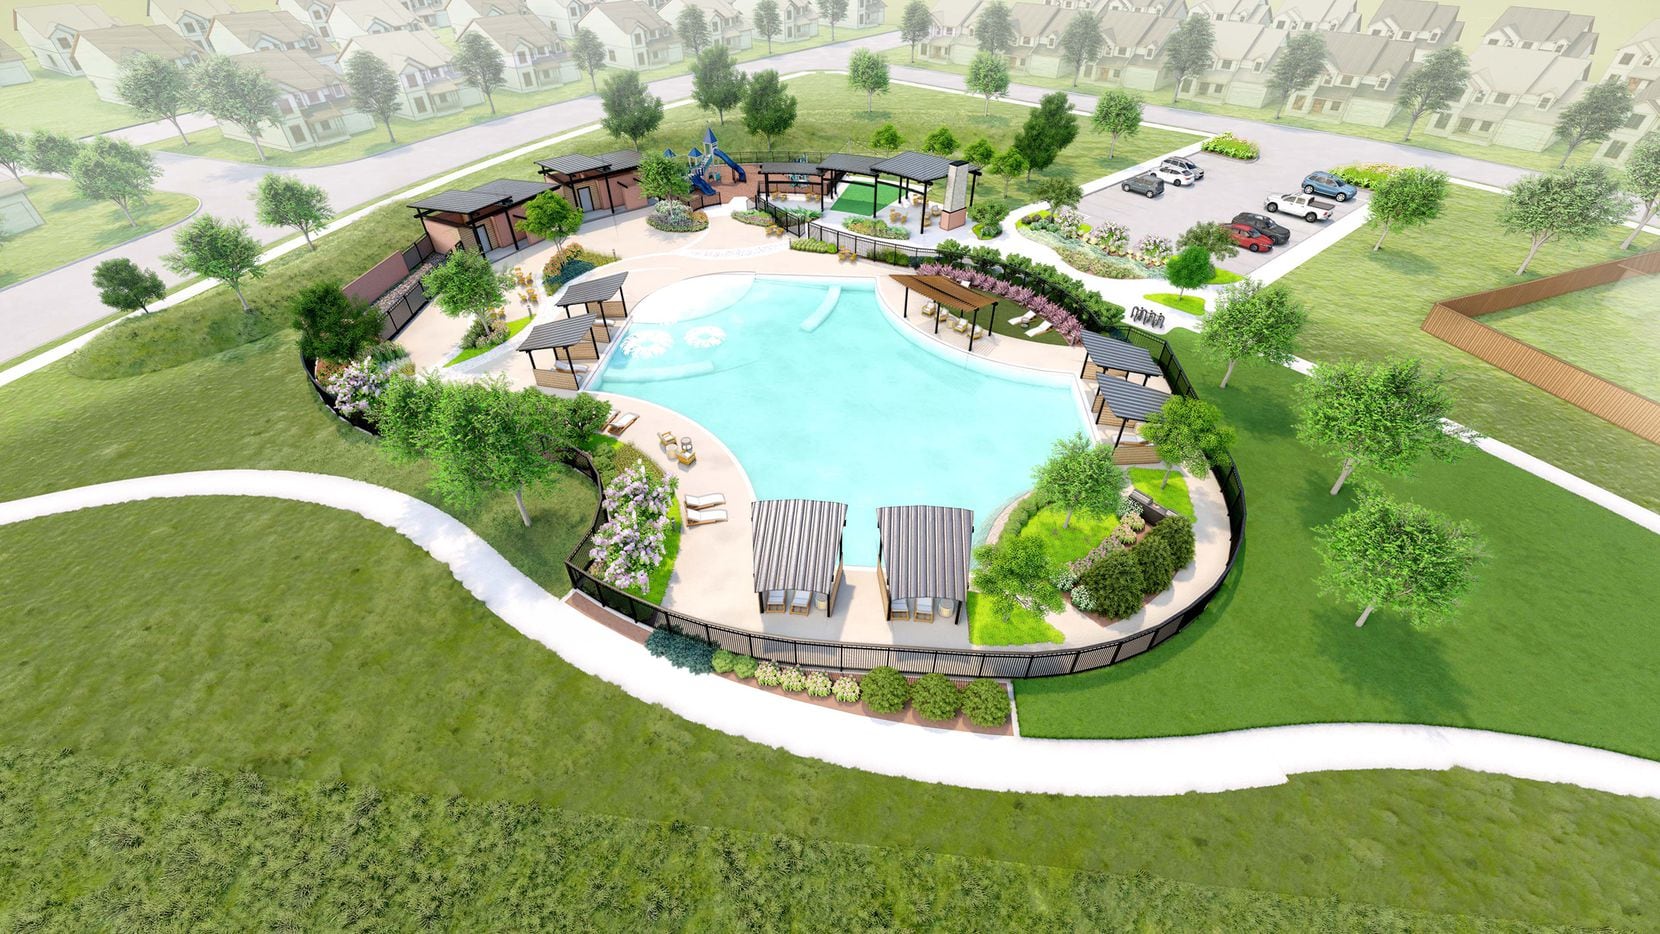 Upon completion, Creekshaw in Royse City will provide plenty of outdoor amenities, including...